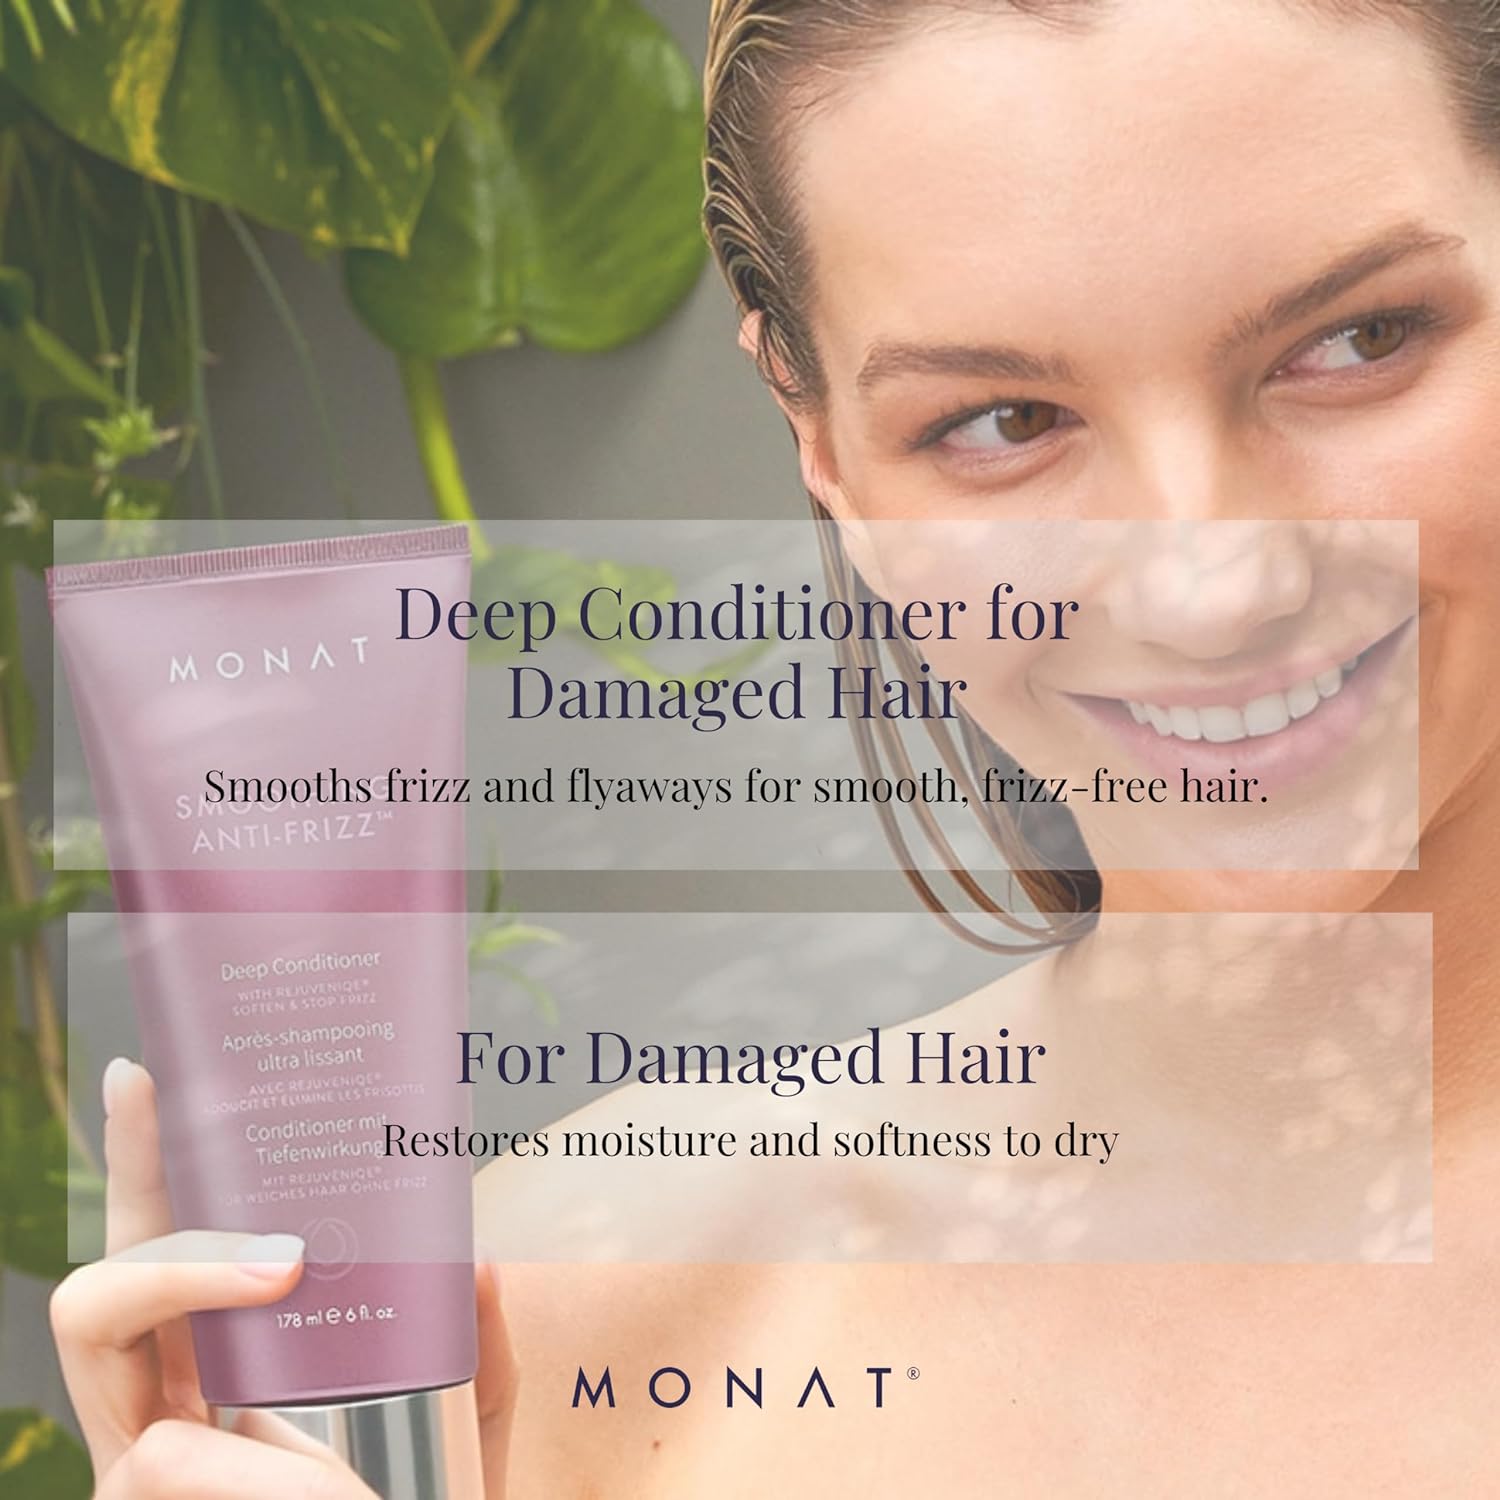 MONAT Smoothing Anti-Frizz™ Deep Conditioner - with Rejuveniqe® Anti Frizz Hair Products/Long-Lasting Frizz Control Hair Care Products, Deep Conditioner for Damaged Hair - Net Wt. 178 ml / 6 fl. oz : Beauty & Personal Care